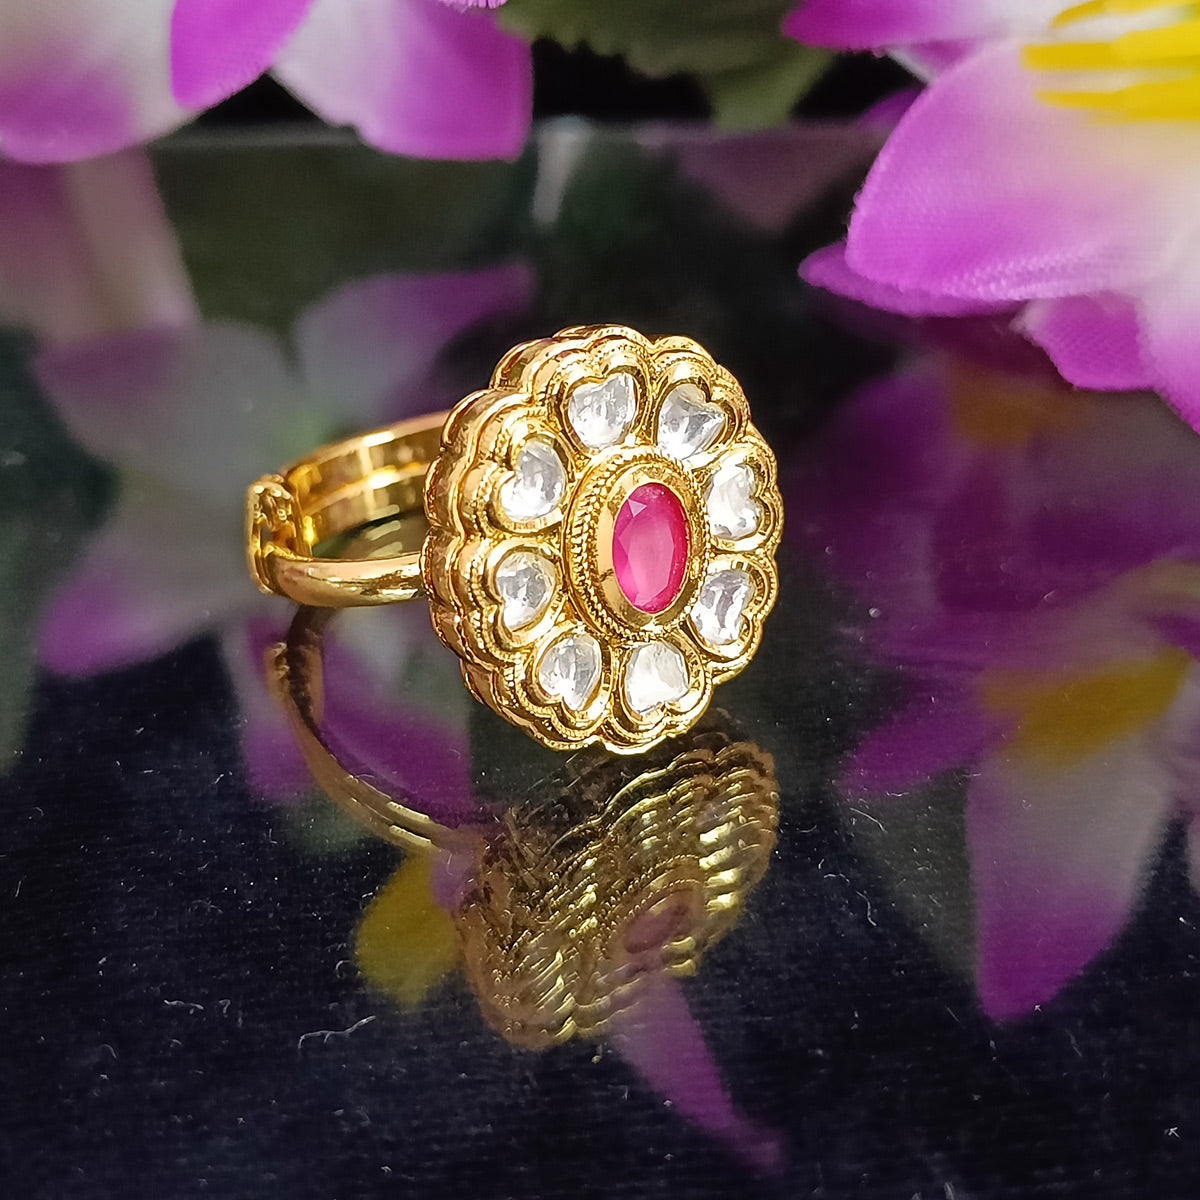 22kt gold ring with vibrant kundan set stones | Gold ring designs, Gold  jewellery design, Bridal gold jewellery designs